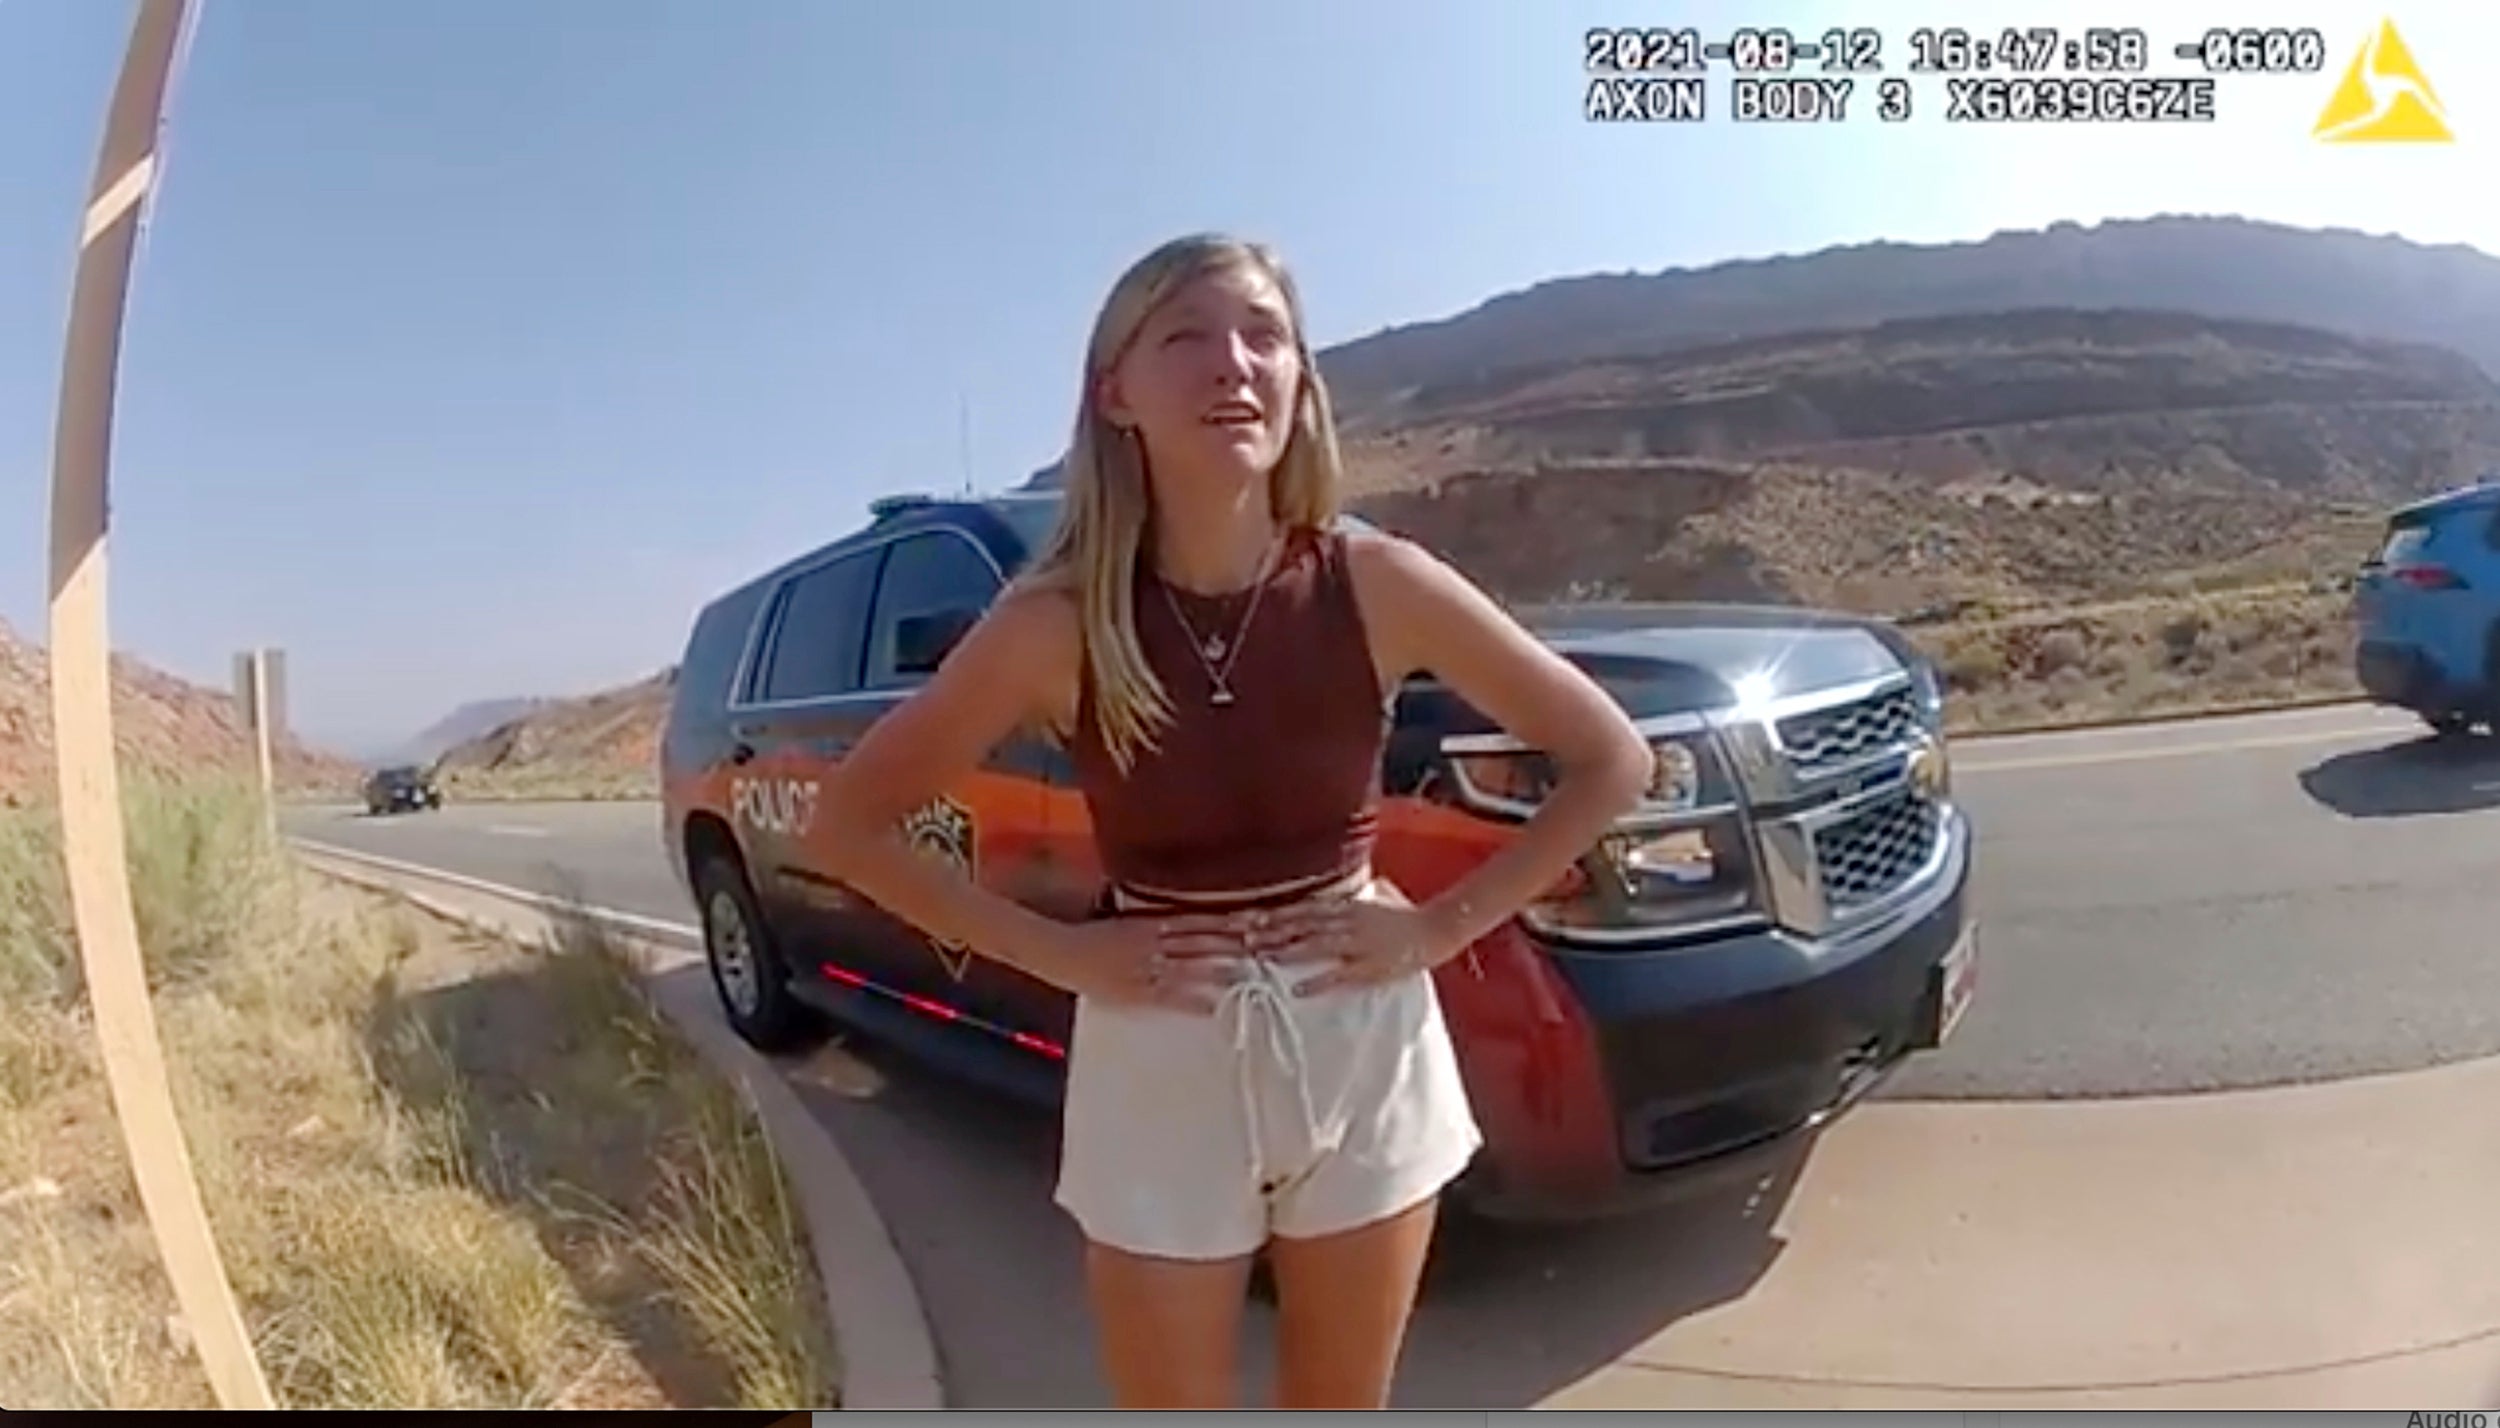 Gabby Petito talks to a police officer after the van she was travelling in with her boyfriend, Brian Laundrie, was pulled over near the entrance to Arches National Park in August 2021